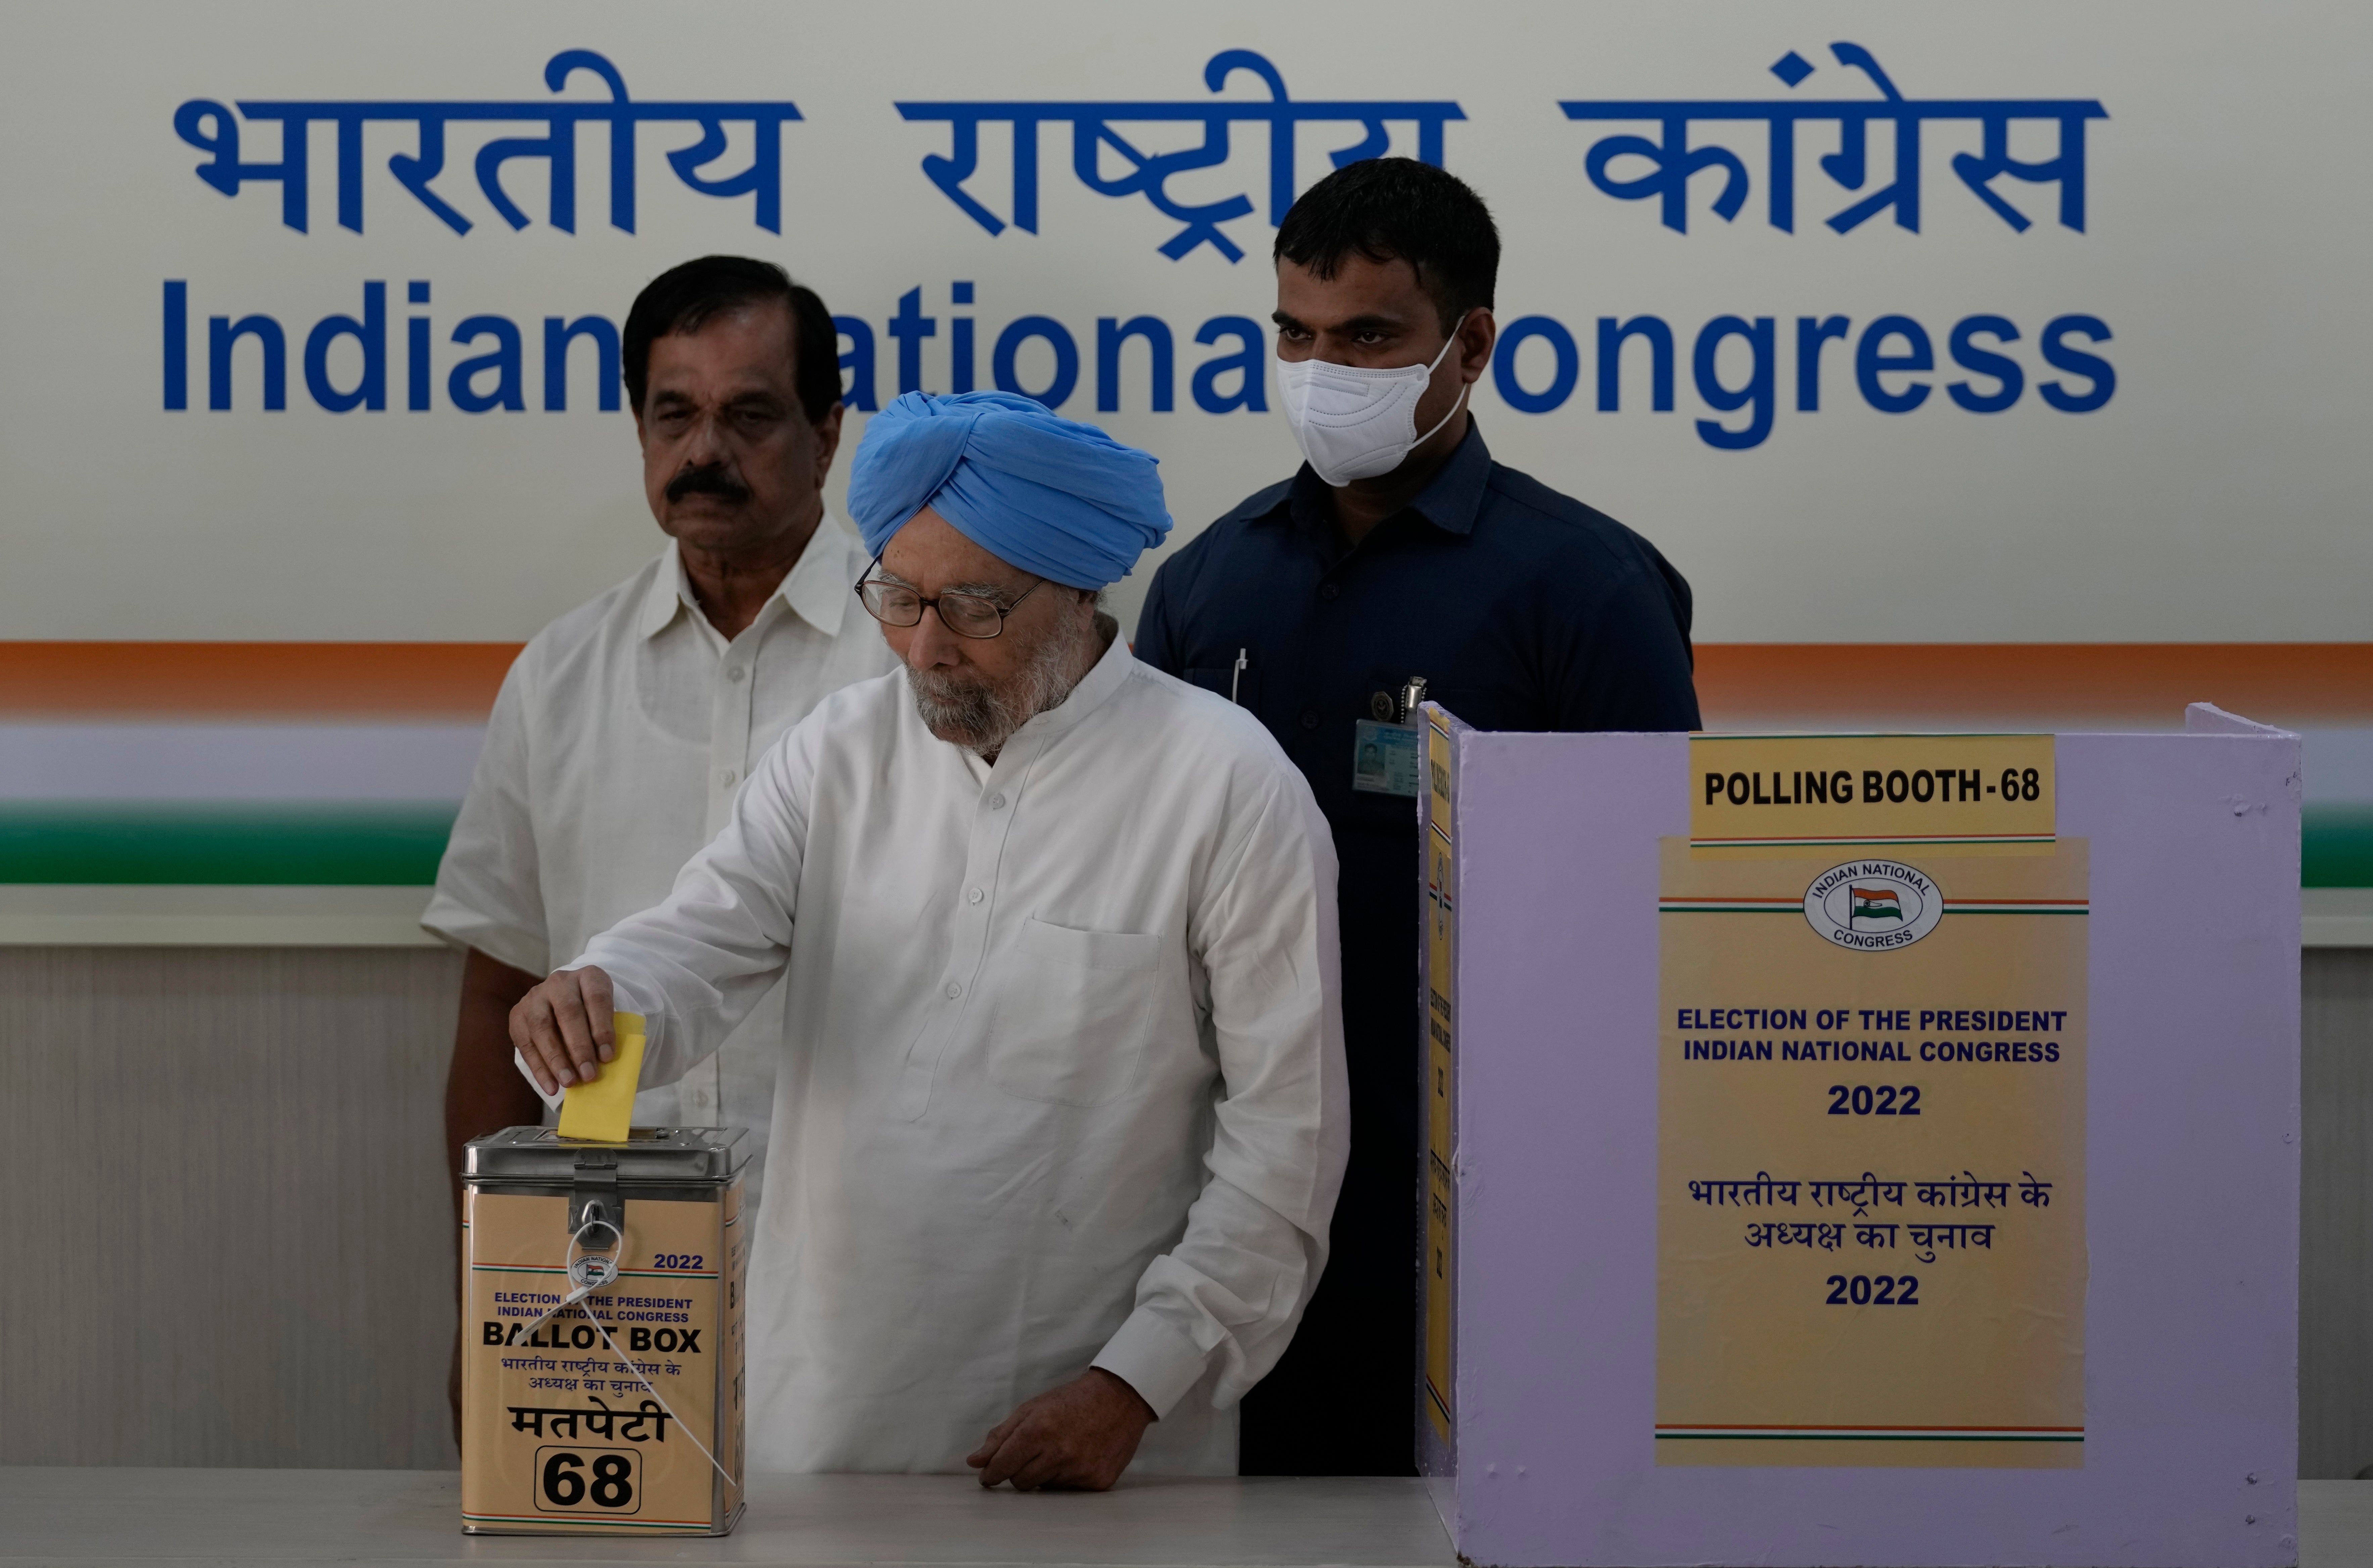 Former Indian prime minister Manmohan Singh casts his vote for congress party president election